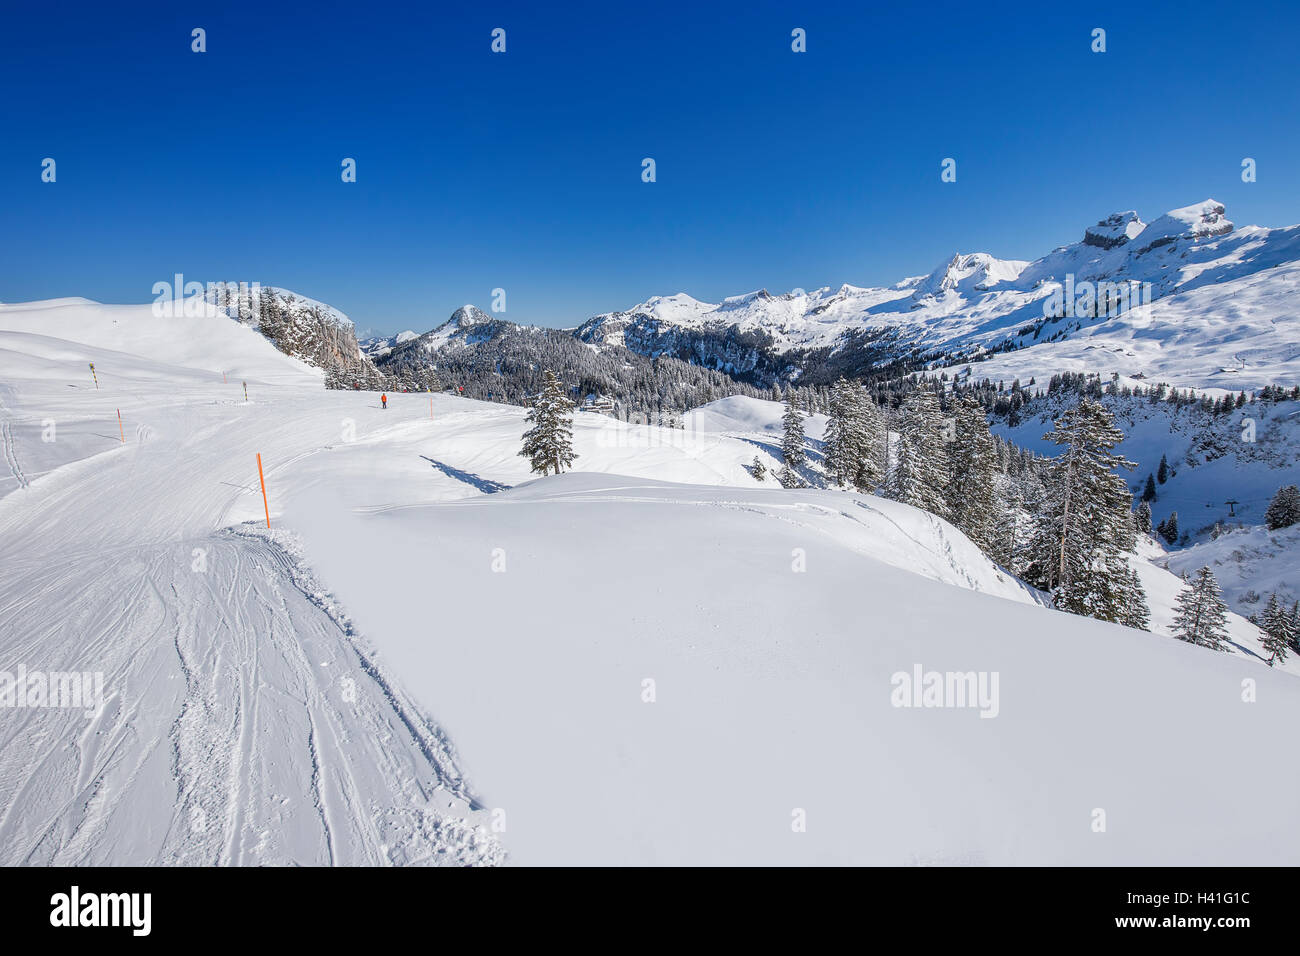 View ti Skiers on the ski slopes and Swiss Alps covered by fresh new snow seen from Hoch-Ybrig ski resort, Central Switzerland Stock Photo